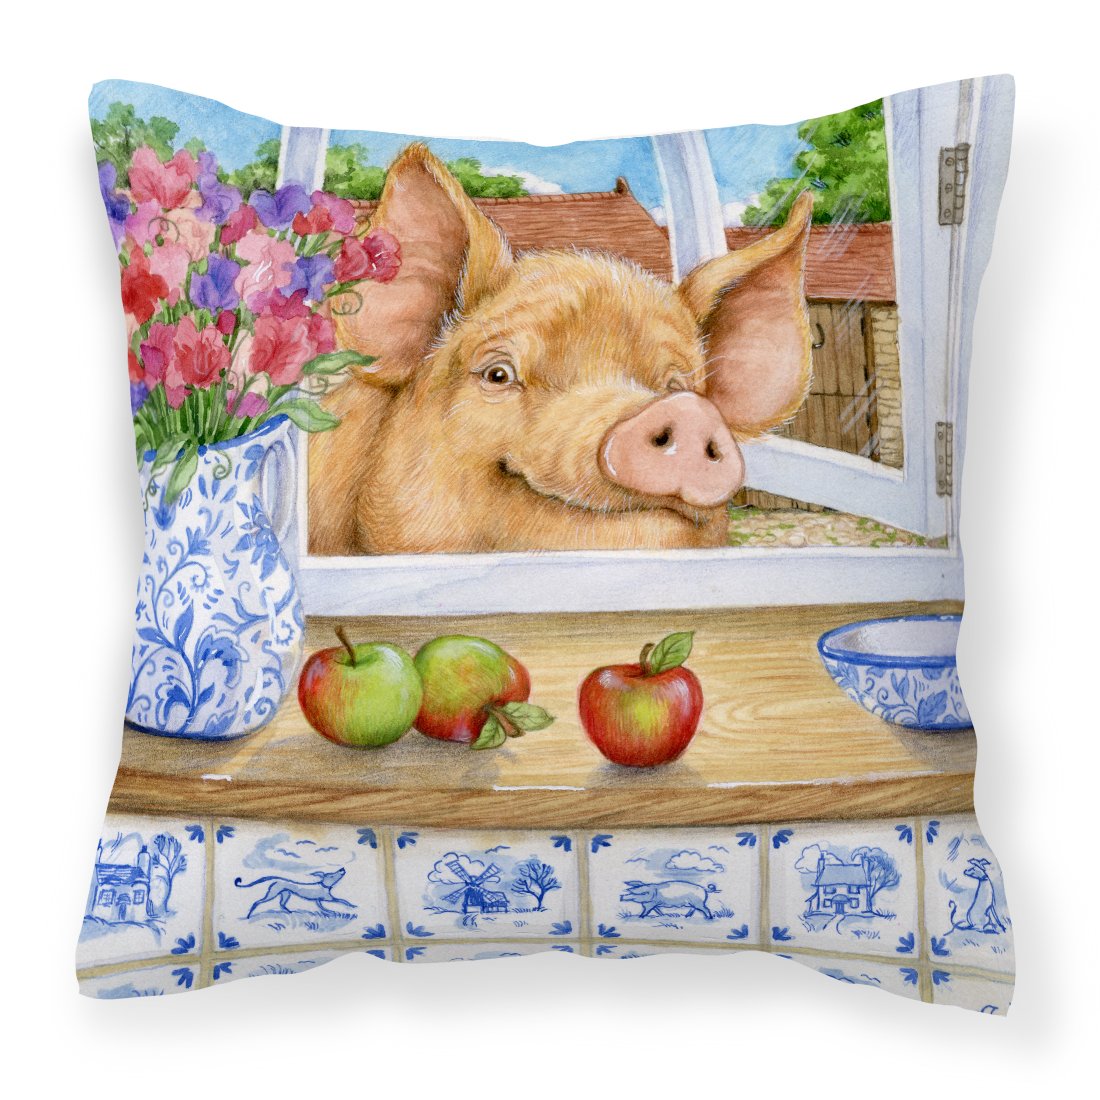 Pig trying to reach the Apple in the Window Canvas Decorative Pillow by Caroline&#39;s Treasures